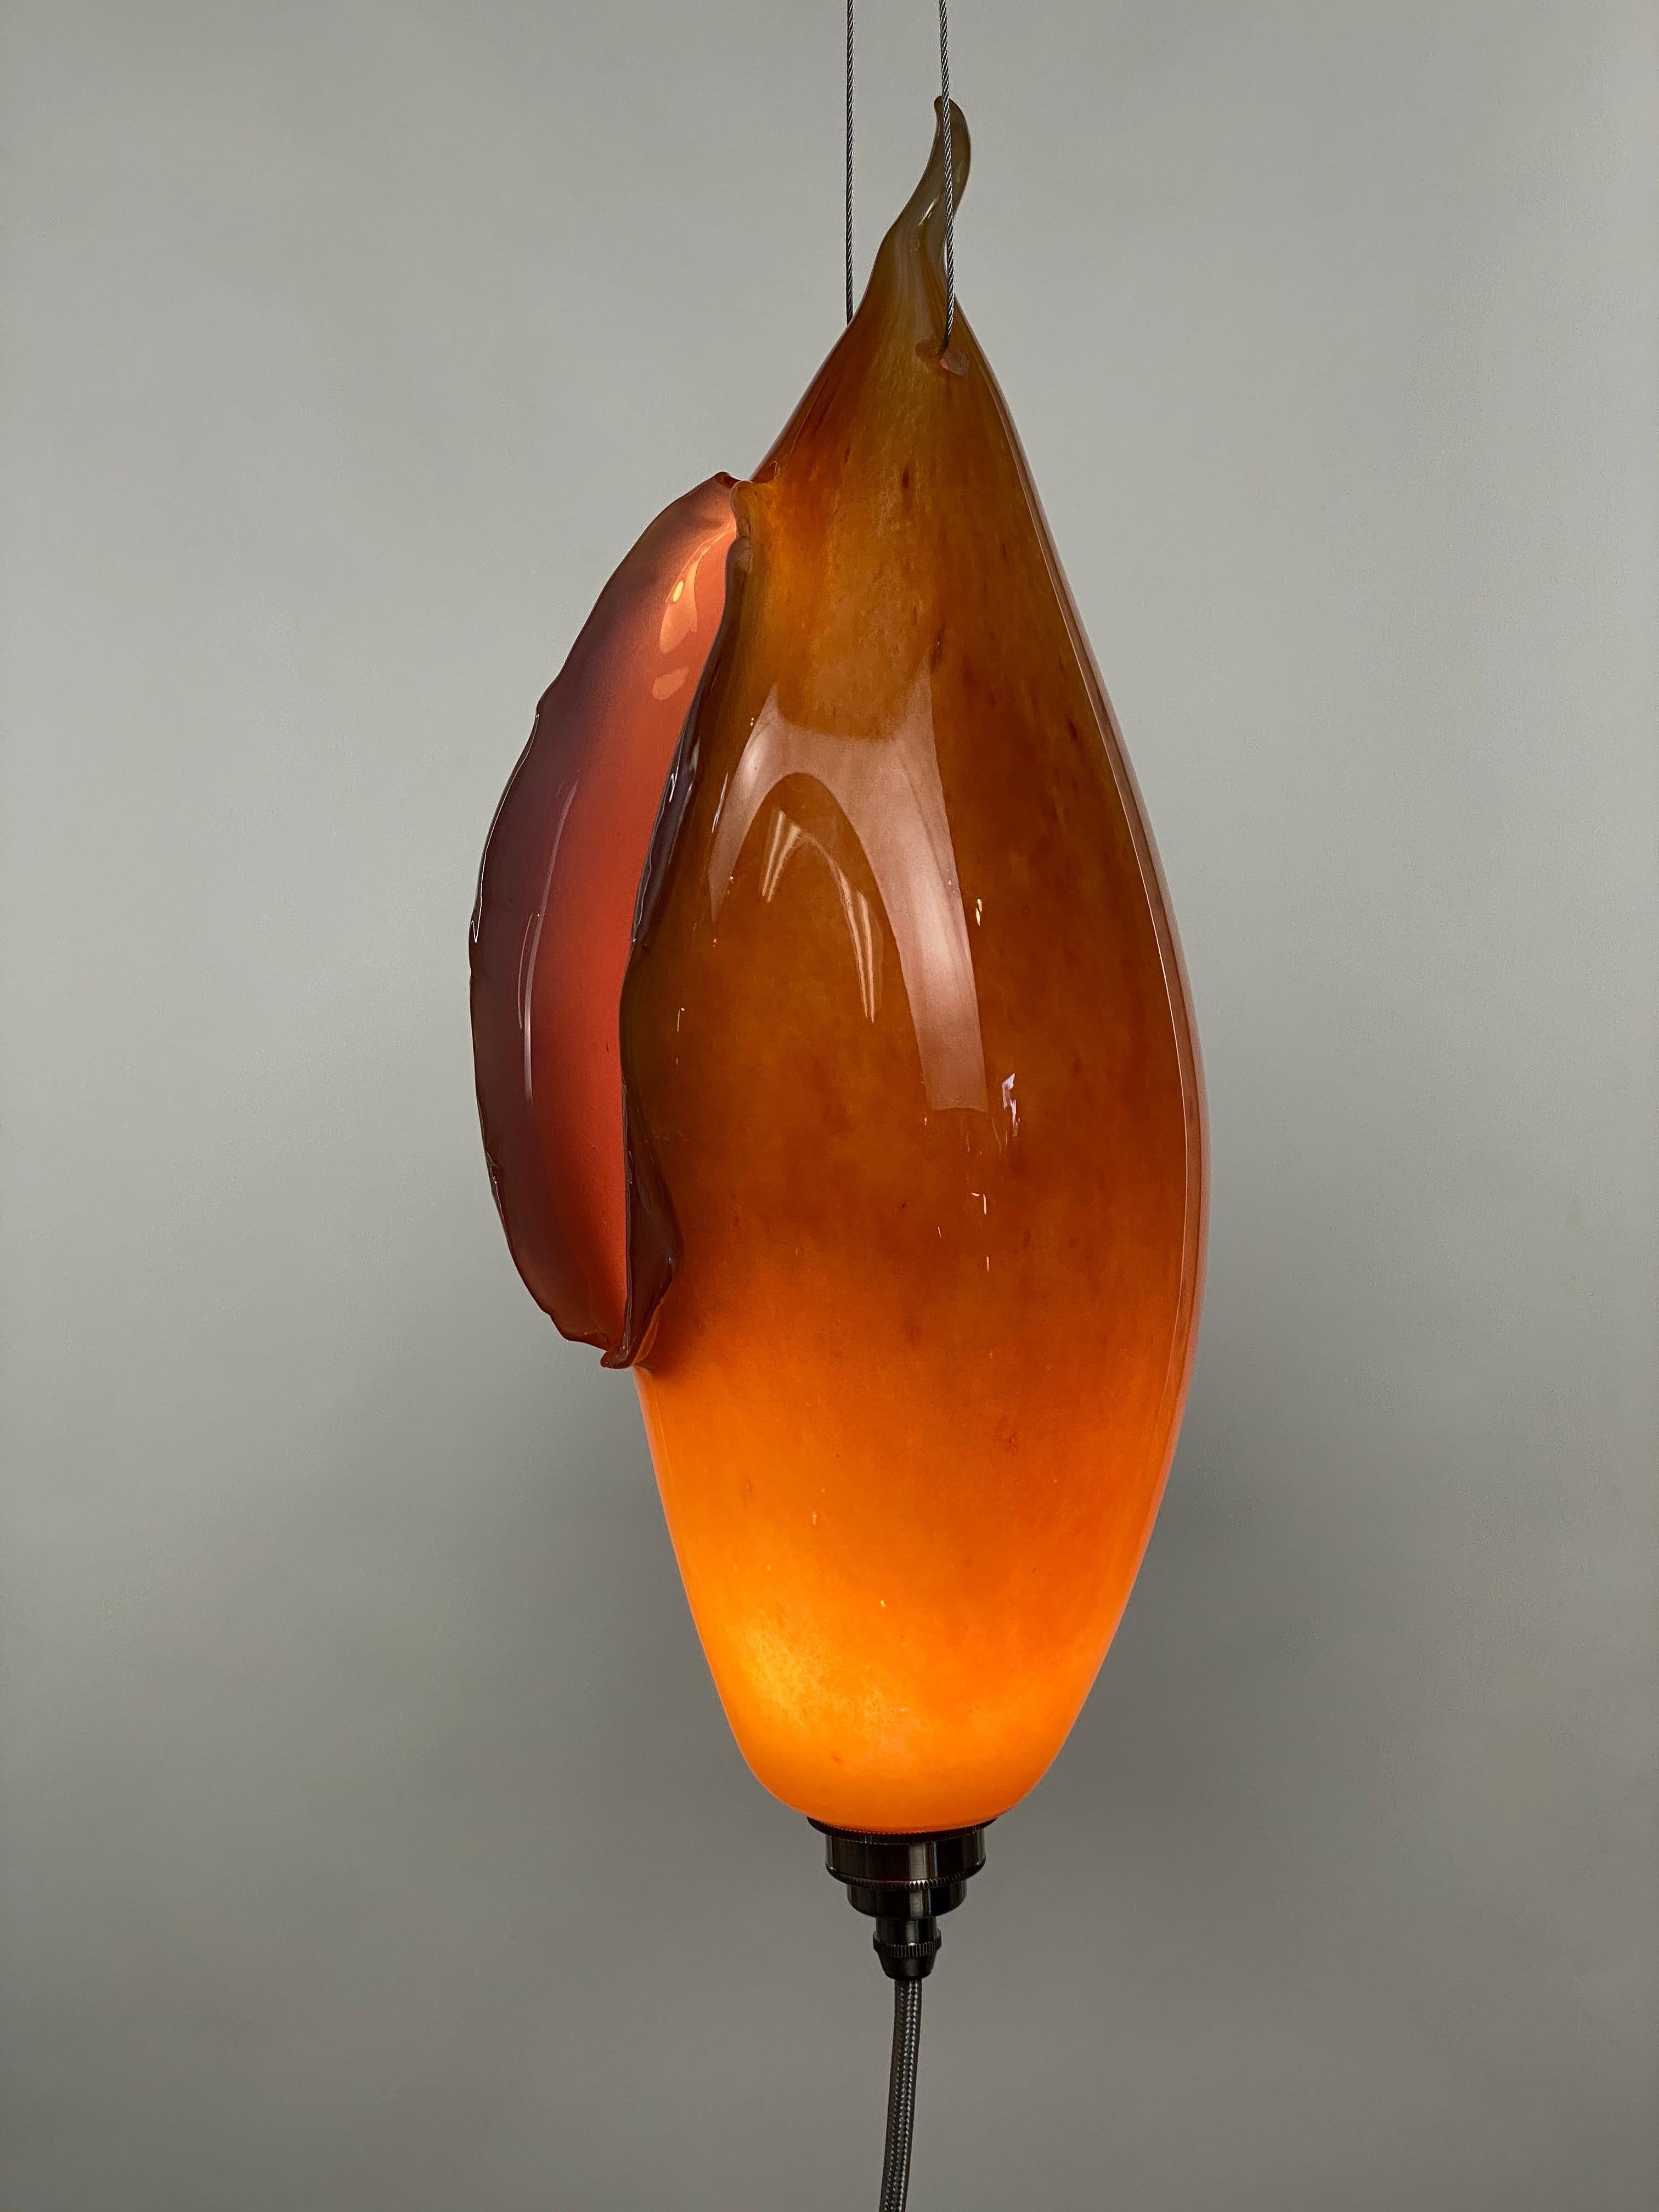 Blown Glass Pink and Orange Lamp Pendent Light, 21st Century by Mattia Biagi For Sale 7